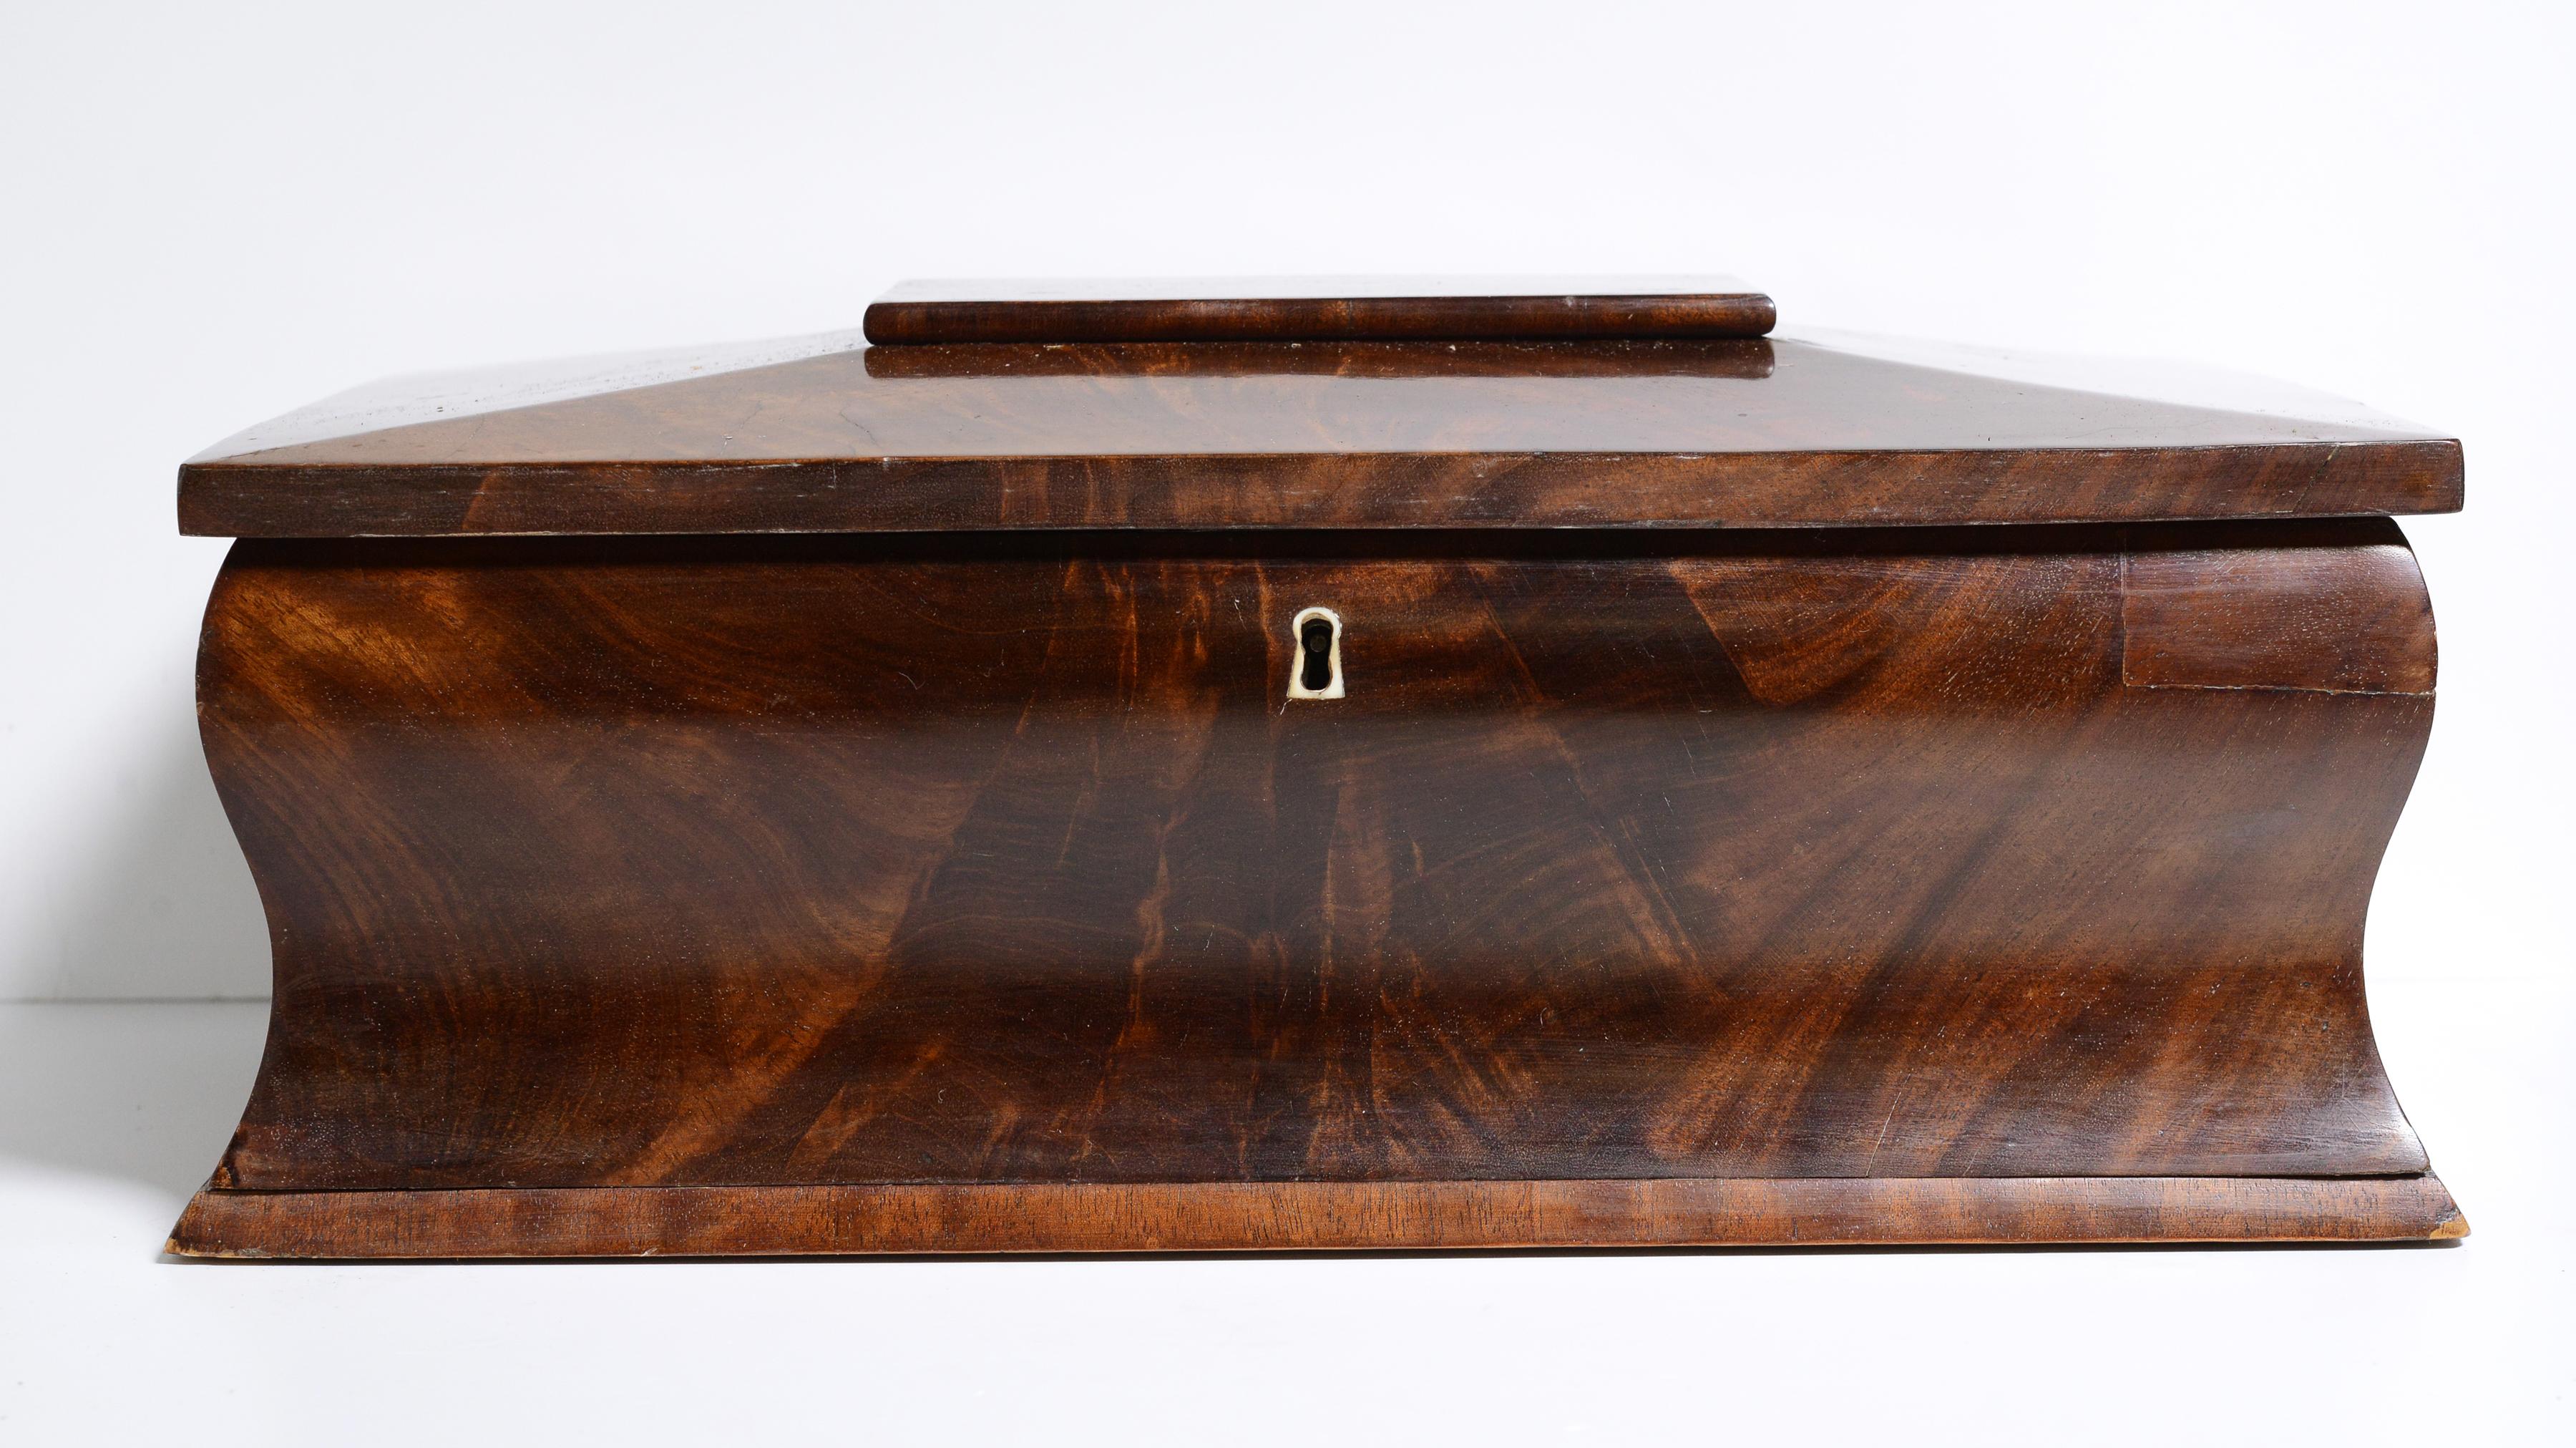 Hand-Carved Wooden Casket Box with Mirror mid 19th century Flame Mahogany Biedermeier For Sale